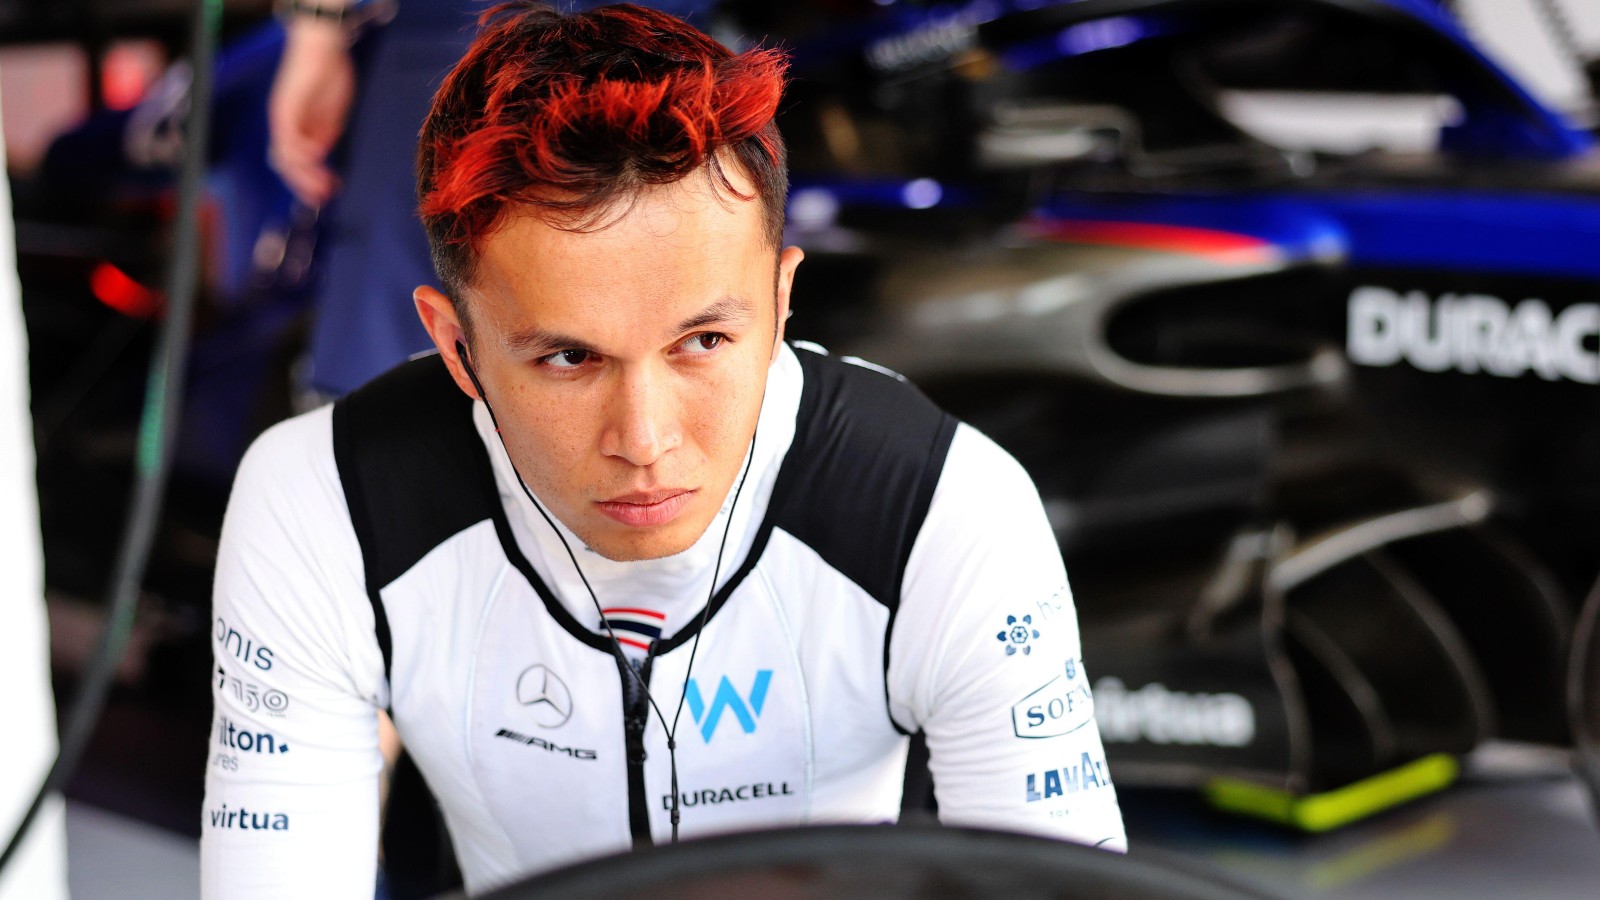 Alex Albon, Williams, looking serious. Hungary, July 2022.